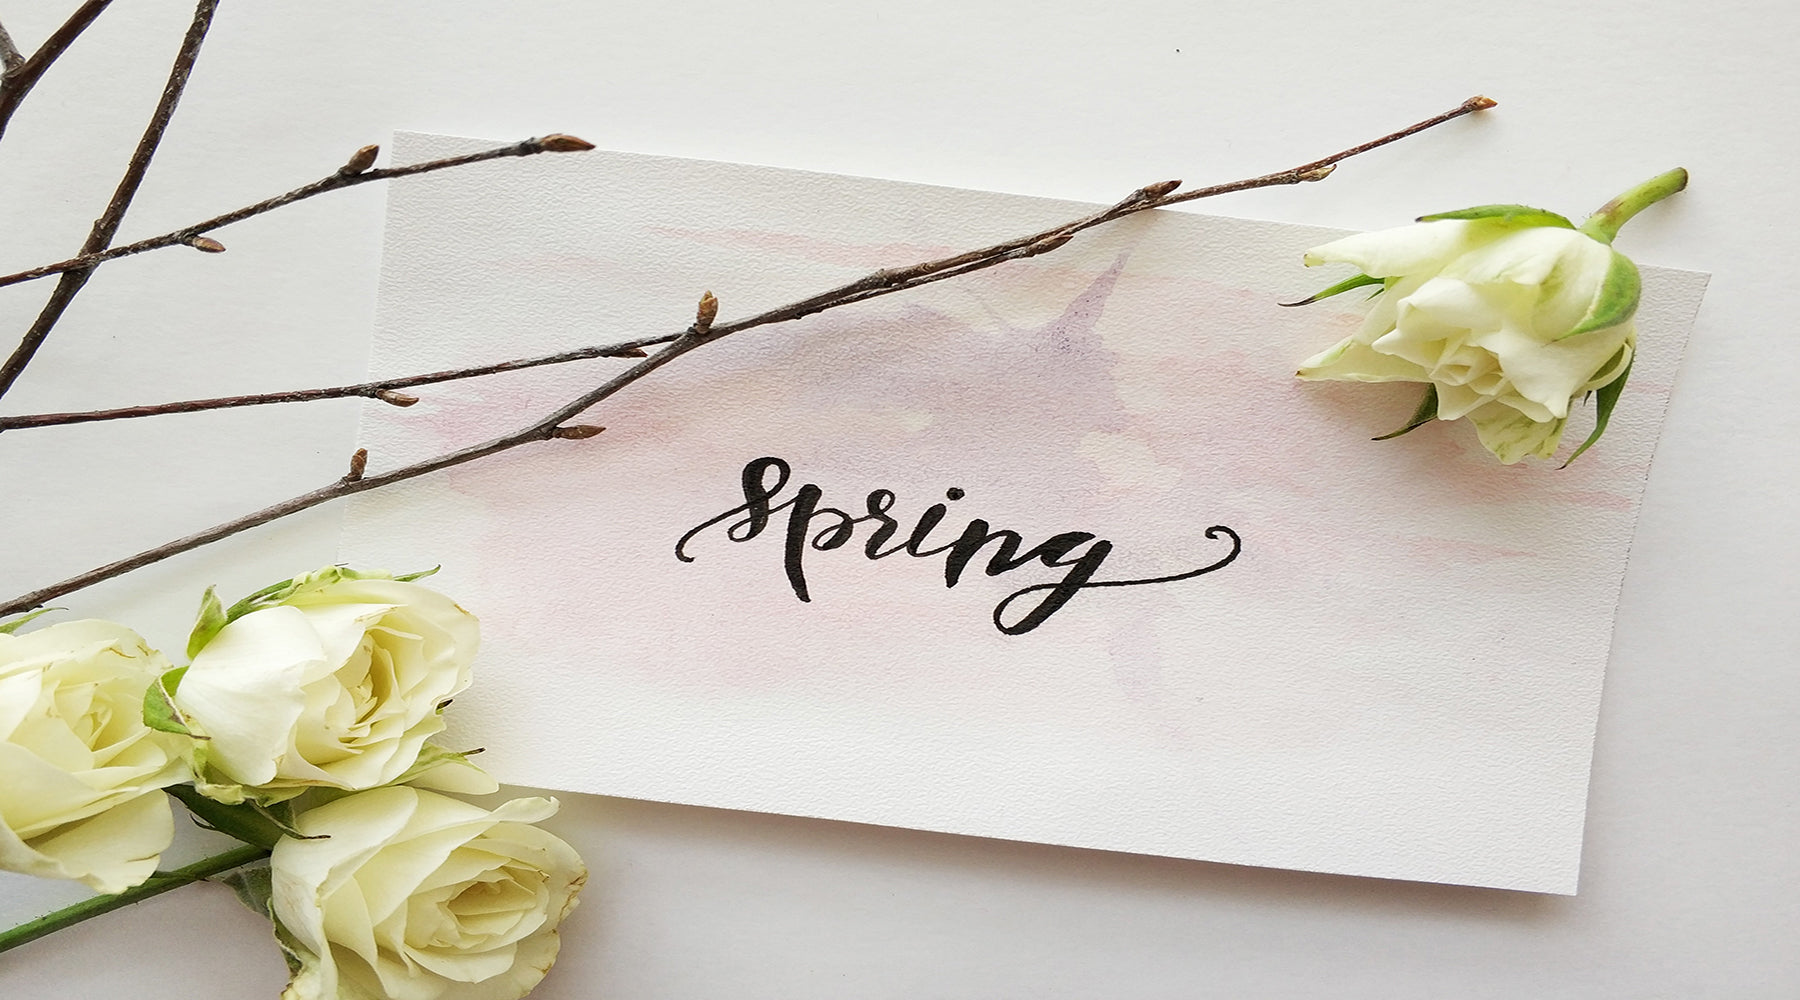 Skincare tips for Spring weather